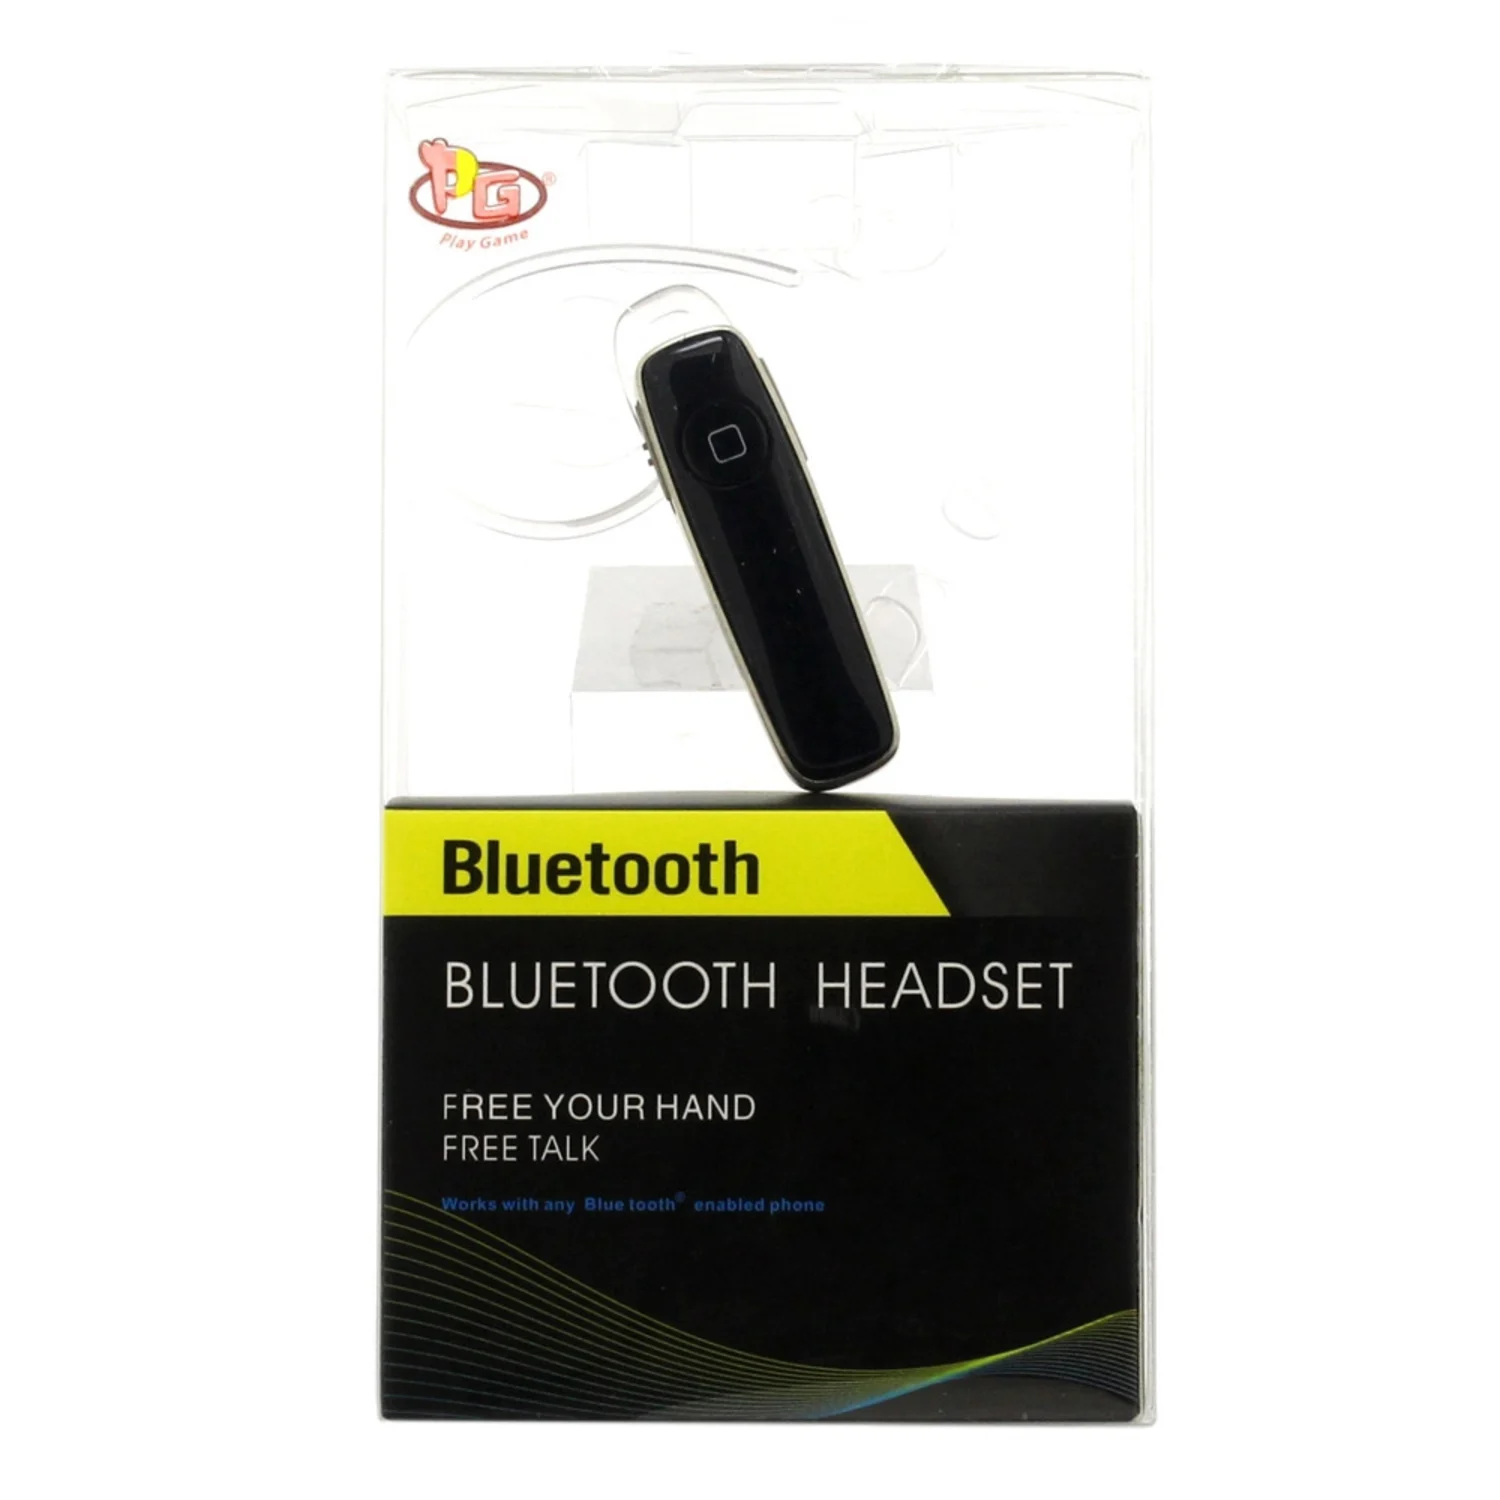 Headset Bluetooth Play Game Blister Ps3